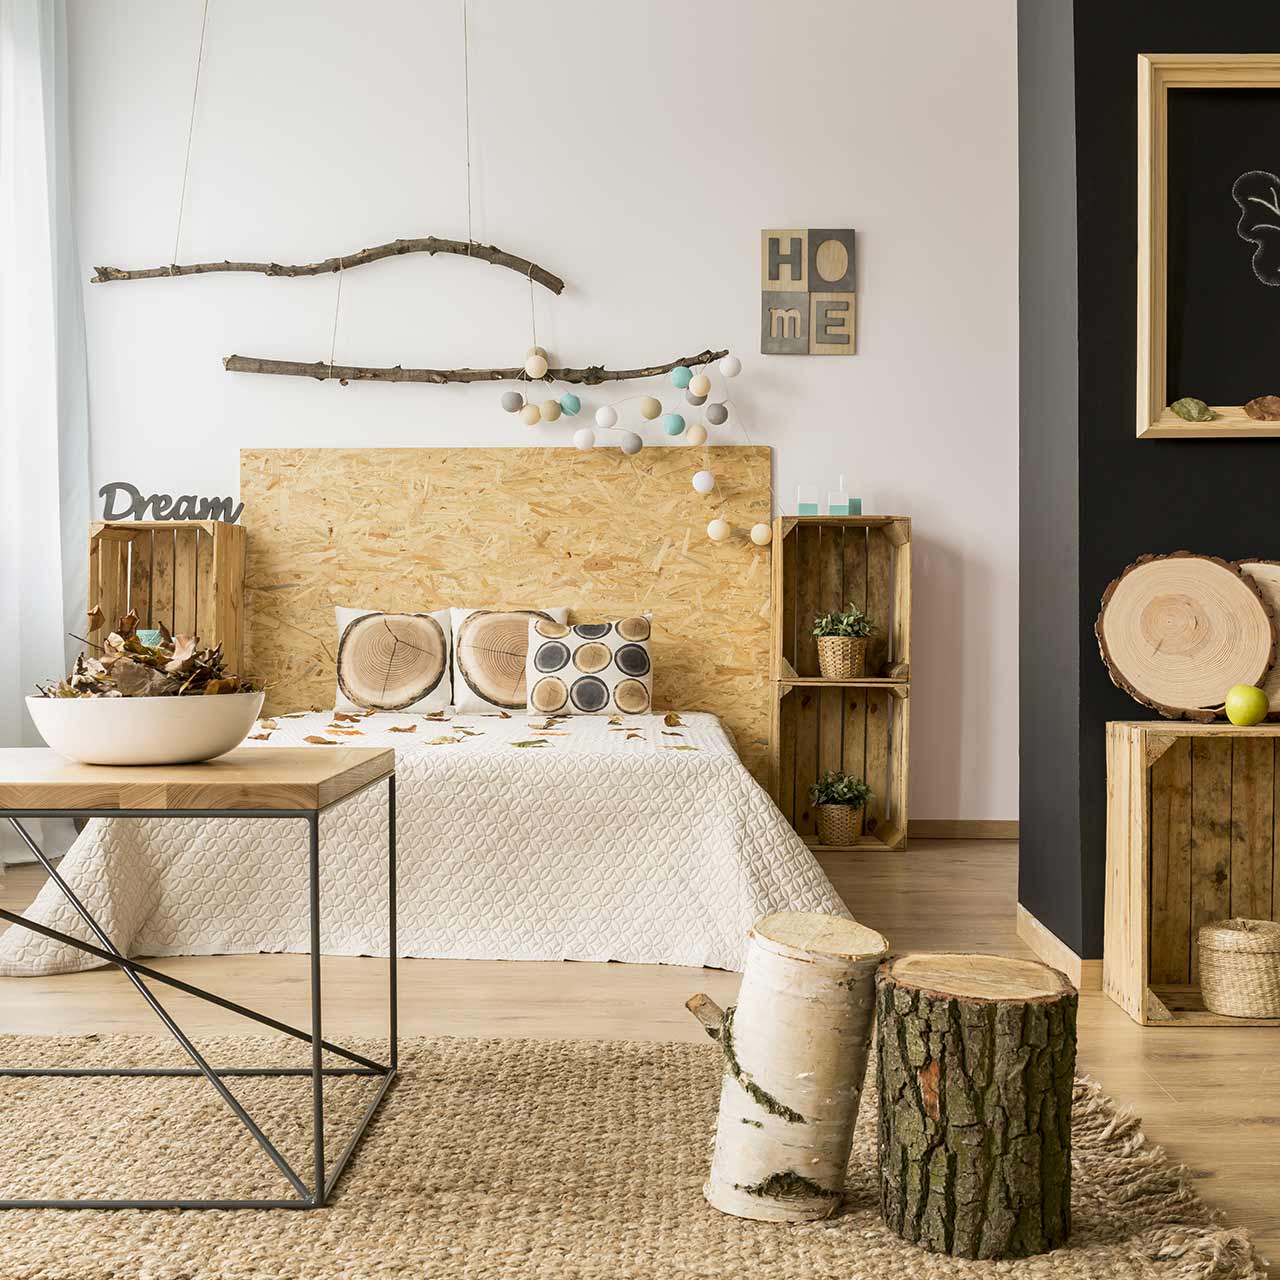 Rustic style bedroom design is your answer to a modern cosy escape from hectic urban life